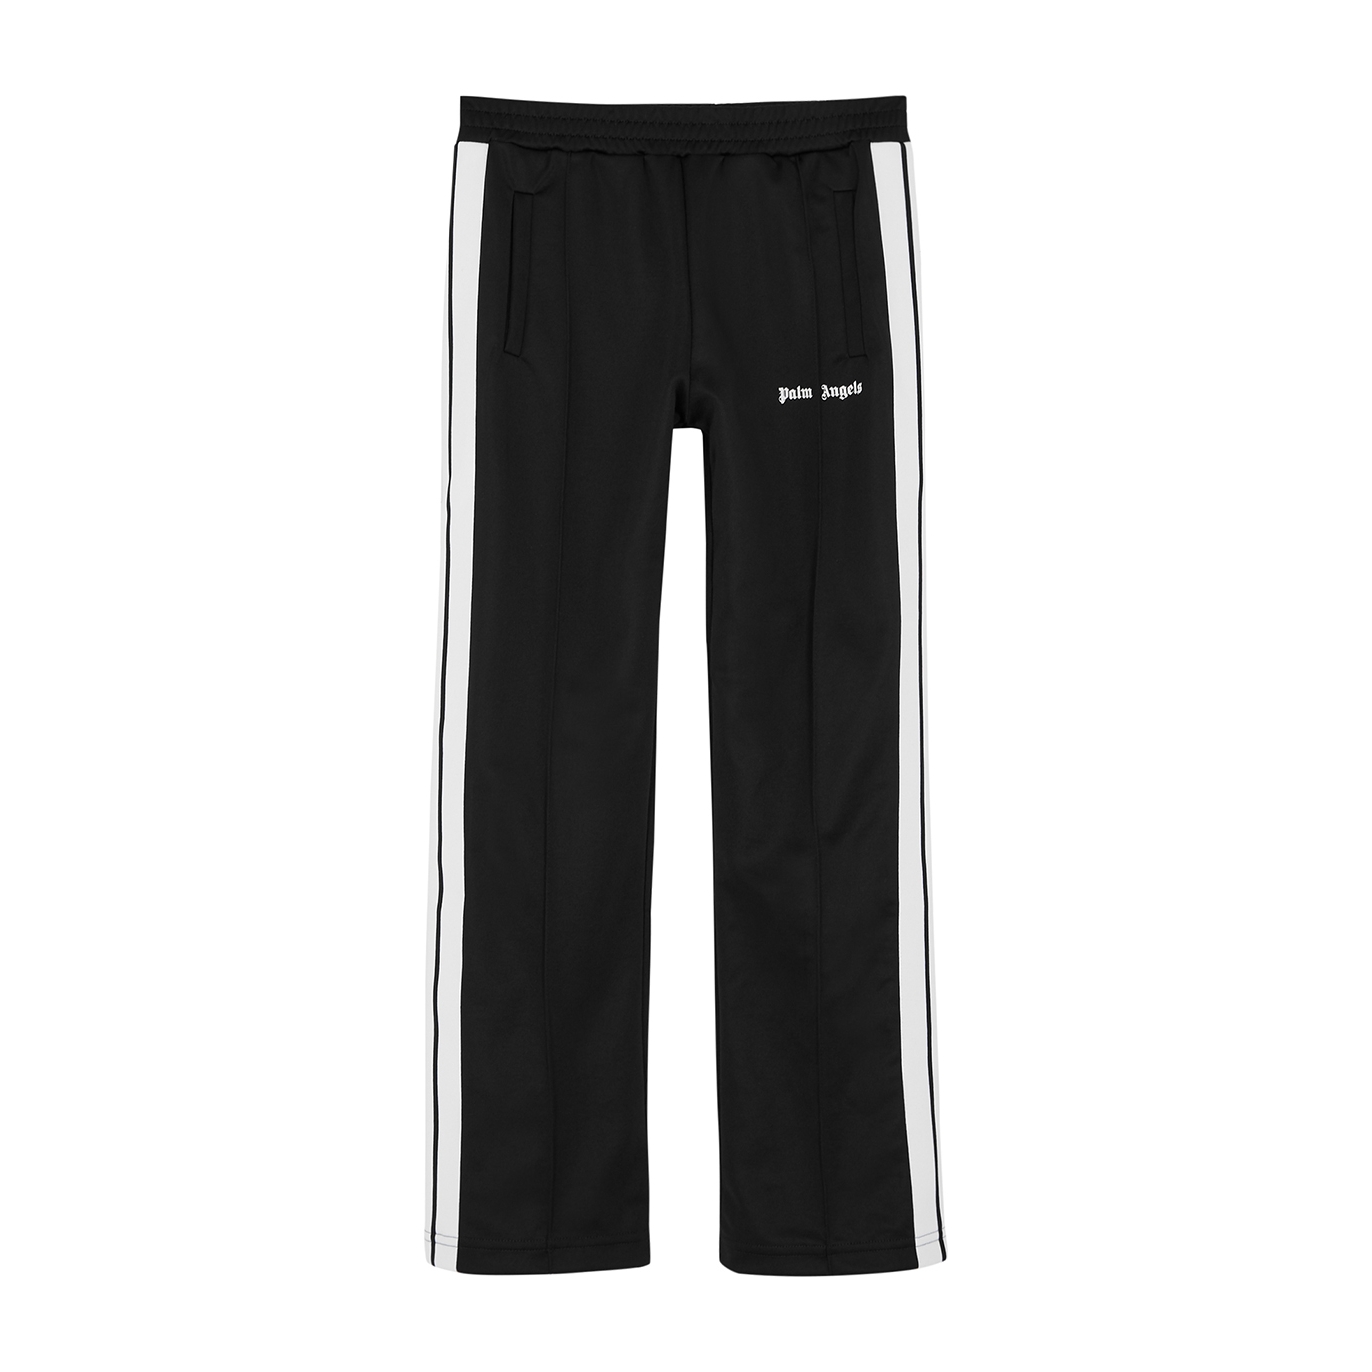 Palm Angels Kids Jersey Track Pants - Black - 12 Years